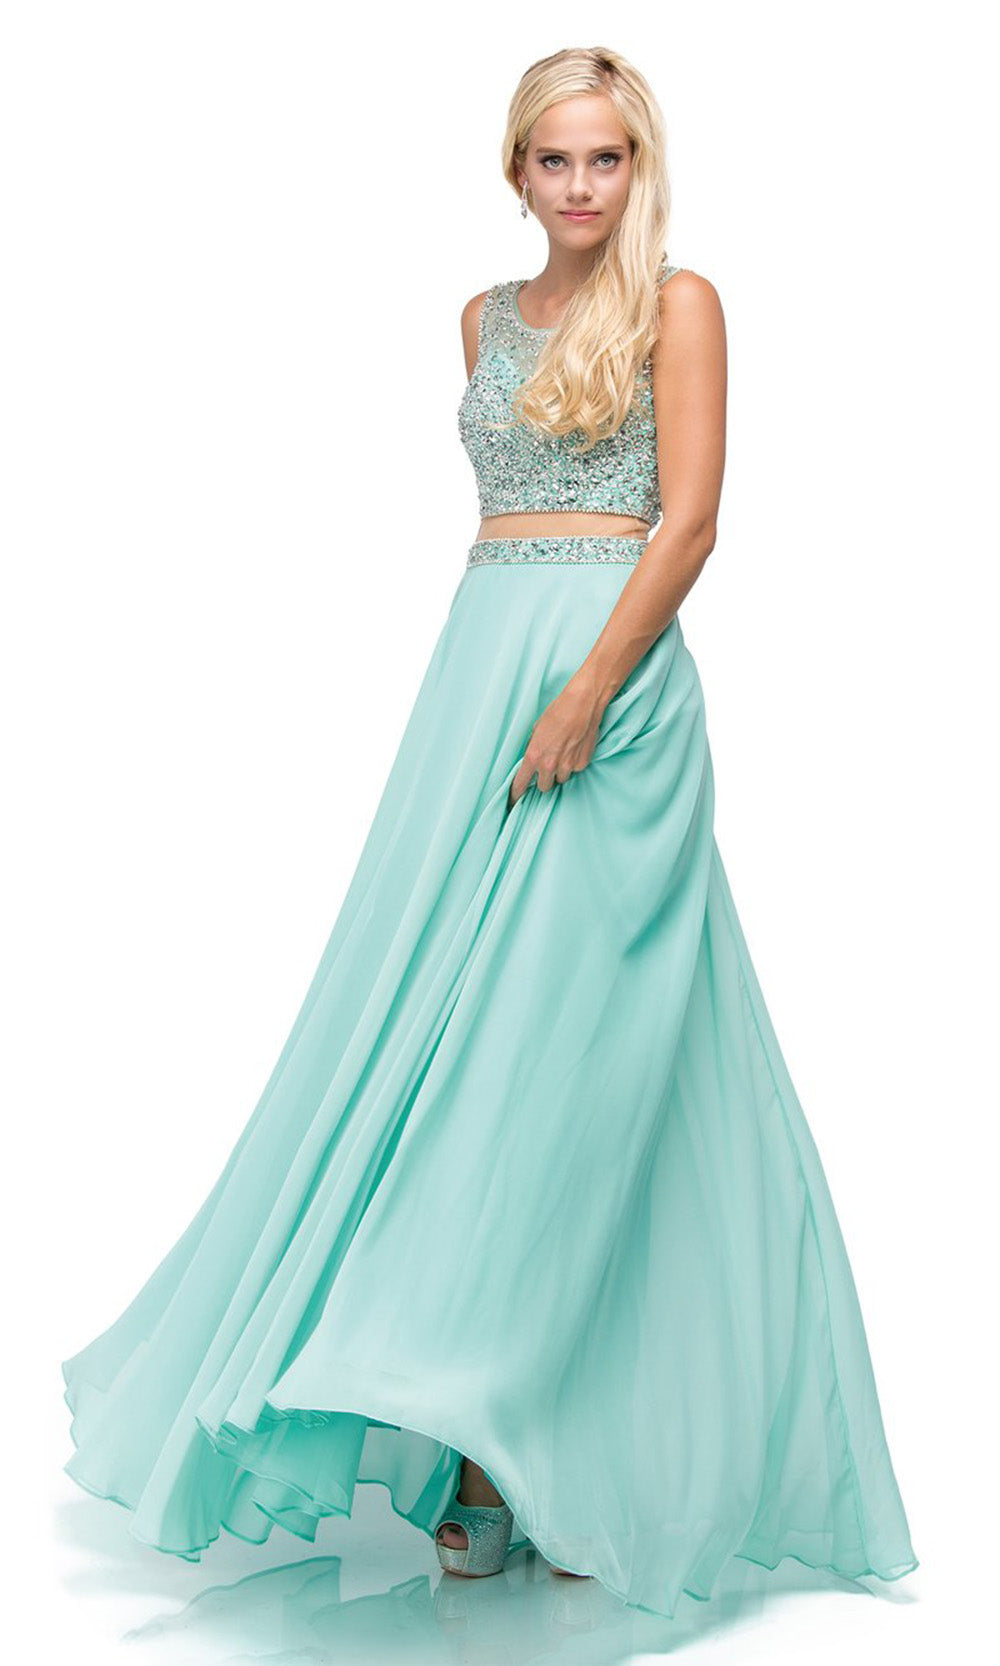 Dancing Queen - 9789 Jeweled Mock-Two-Piece A-Line Dress In Green